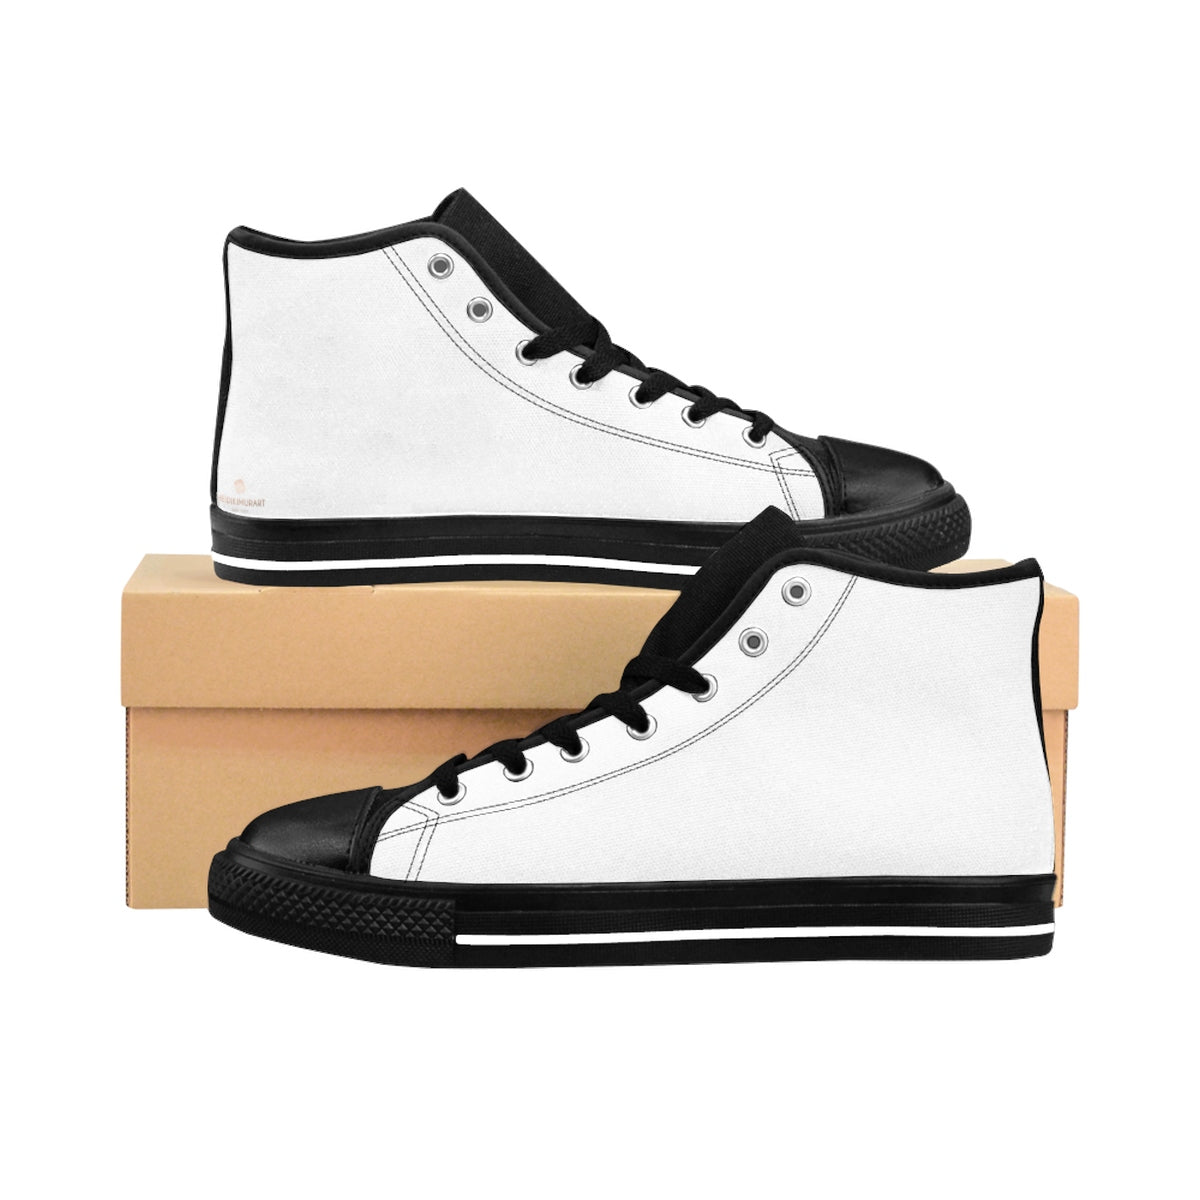 White Princess Solid Color Women's High Top Sneakers Running Shoes (US Size: 6-12)-Women's High Top Sneakers-US 9-Heidi Kimura Art LLC White Women's Sneakers, Modern Minimalist White Princess Solid Color Women's High Top Minimalist Fashion Sneakers Running Shoes (US Size: 6-12)